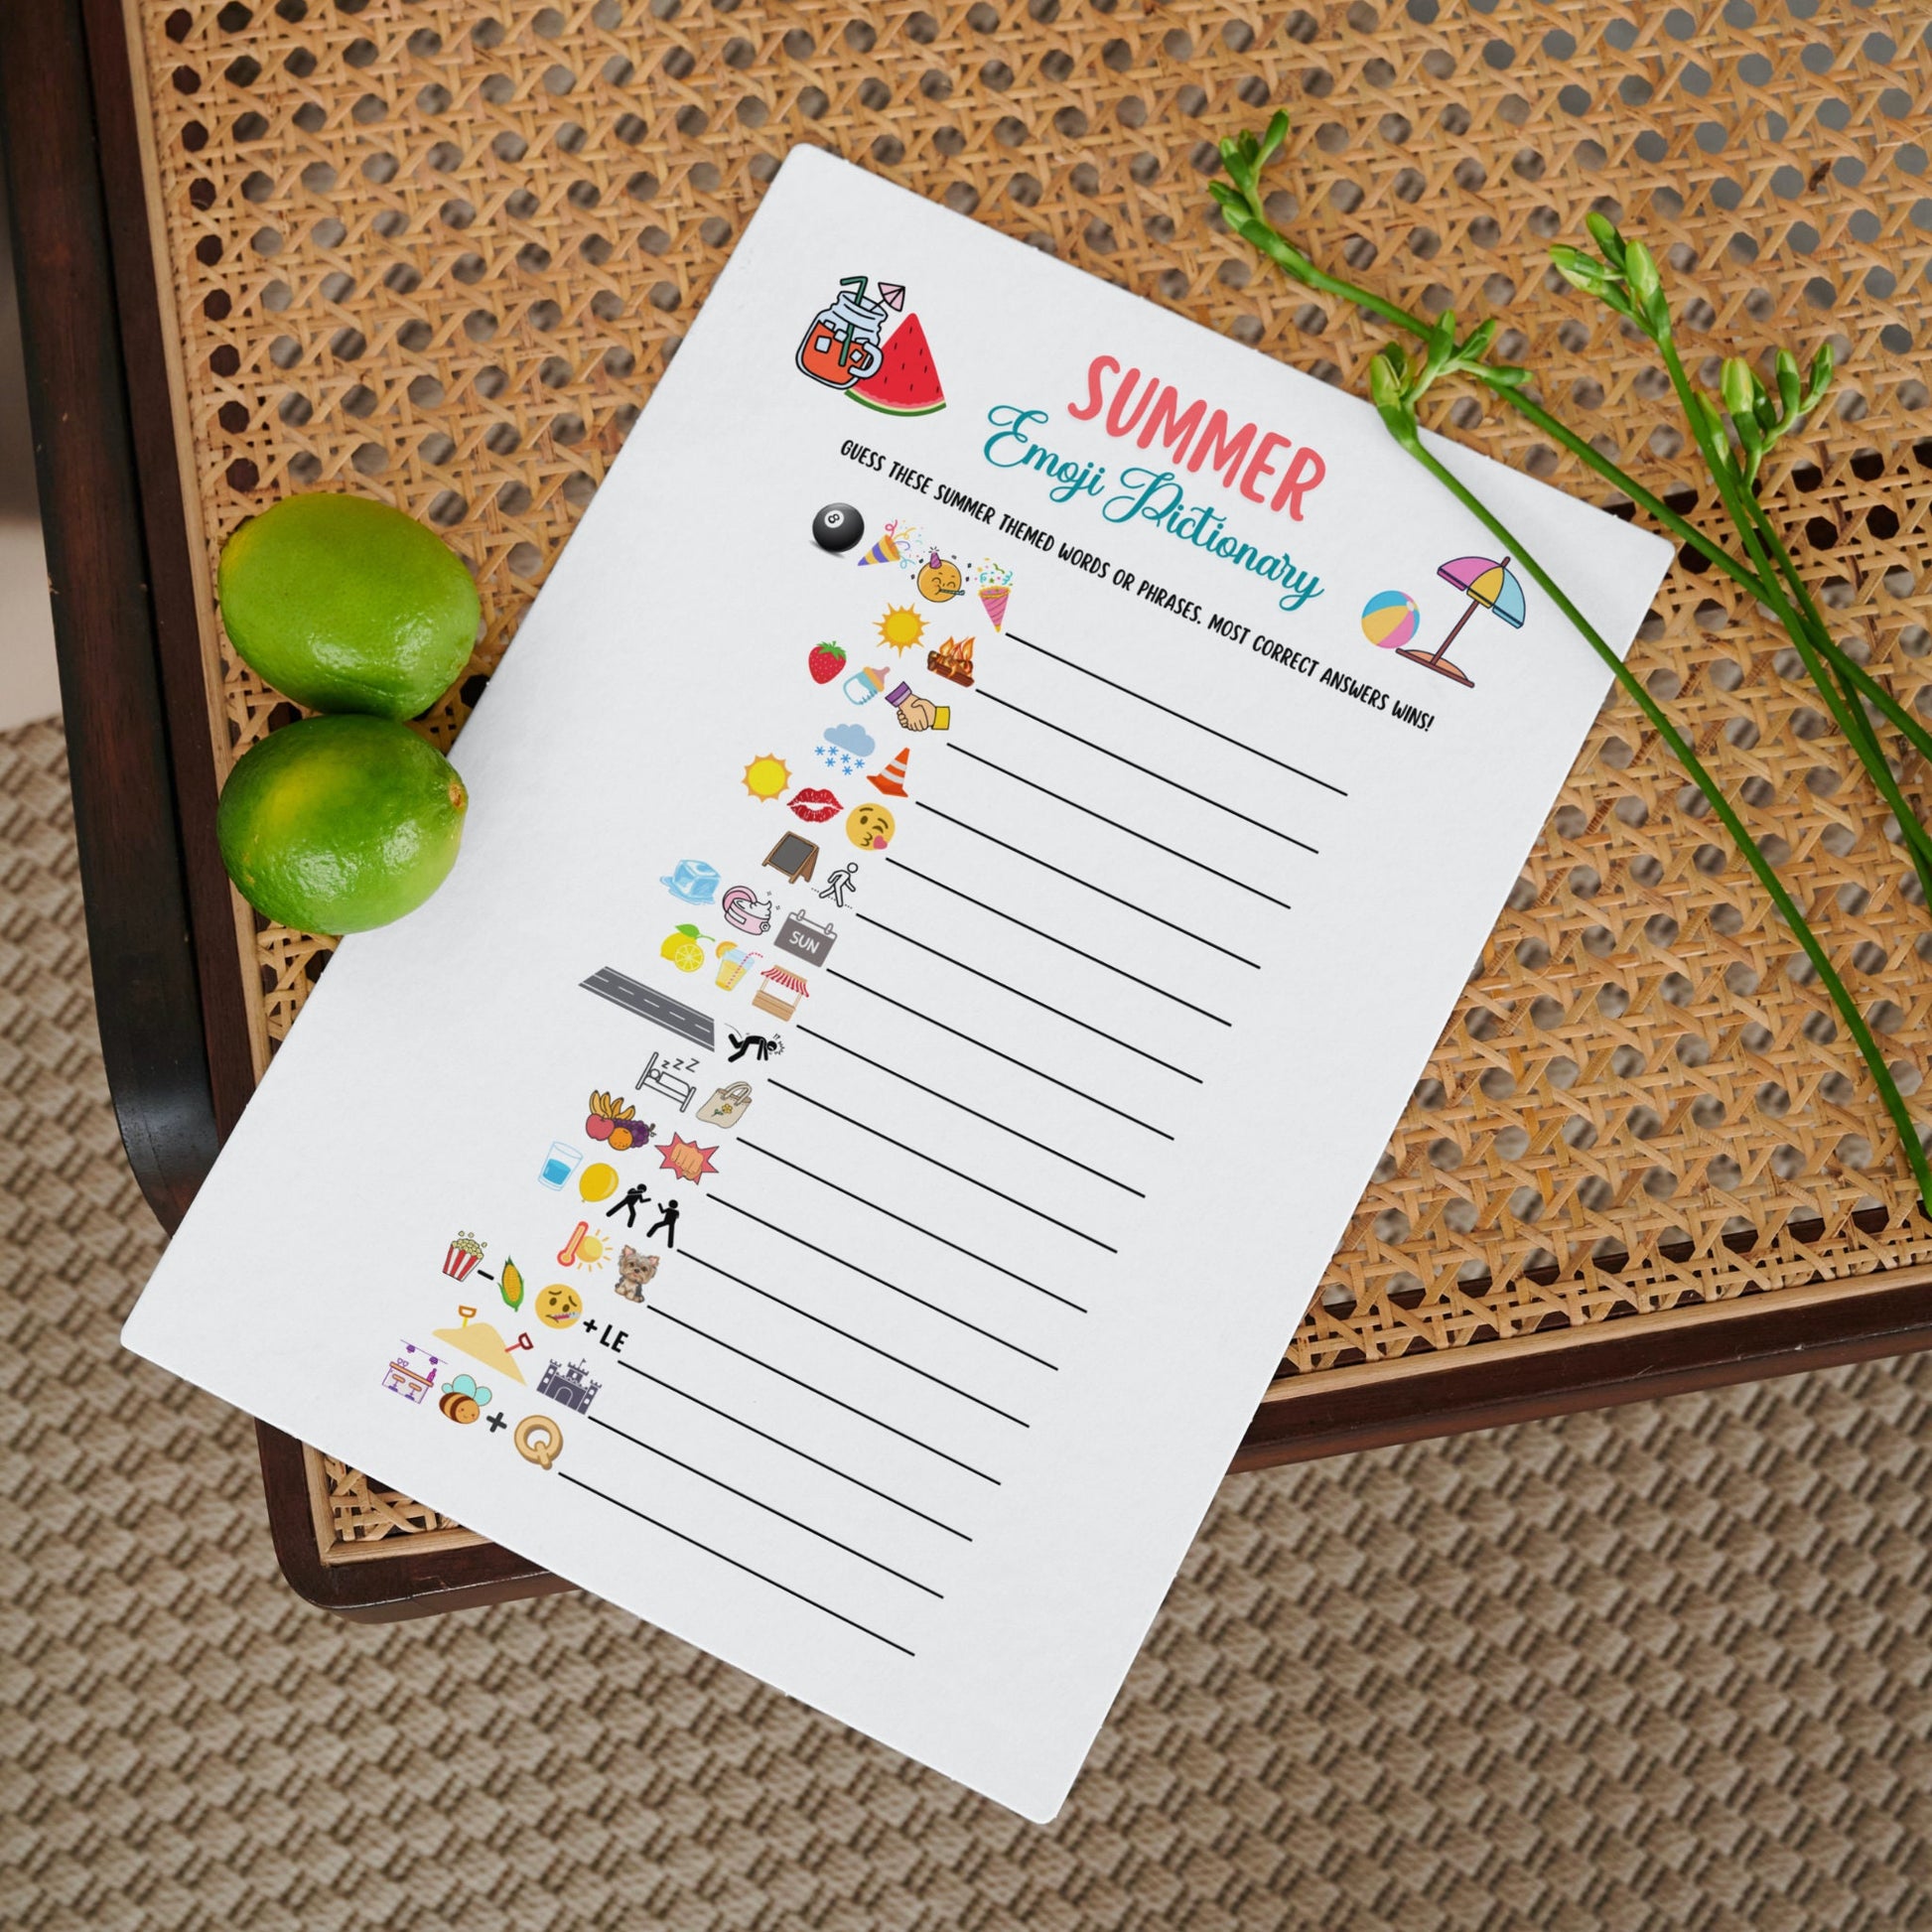 Summer Emoji Pictionary Game Printable, Summertime Activities for Adults & Kids, Fun Pool Party Games, Family Trivia Game, Emoji Quiz Game